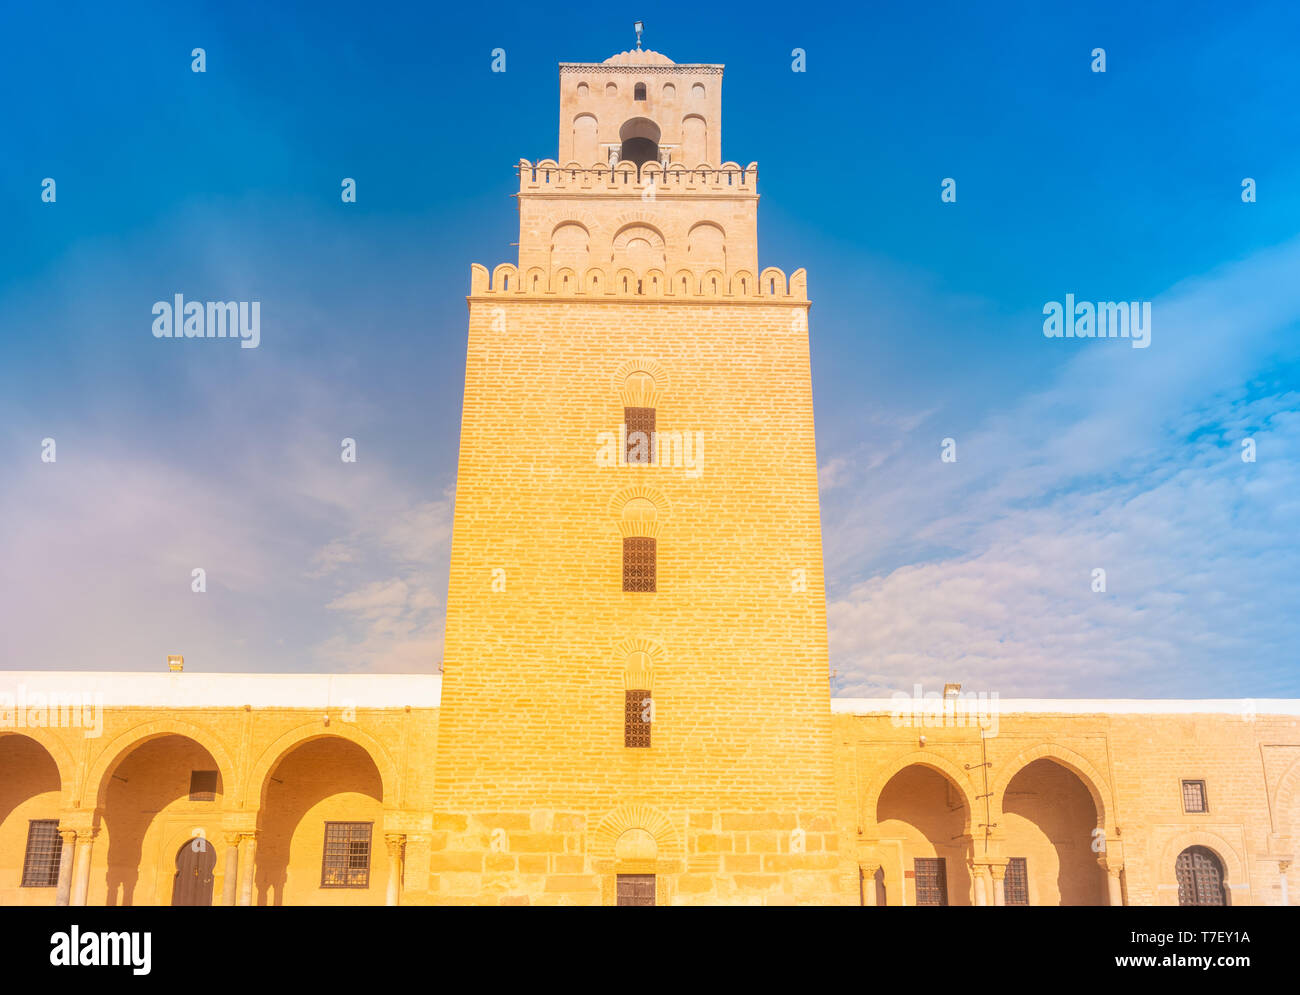 Ancient Great Mosque in Kairouan in Sahara Desert, Tunisia, Africa. An important destination in Tunisia and Northern Africa. Stock Photo